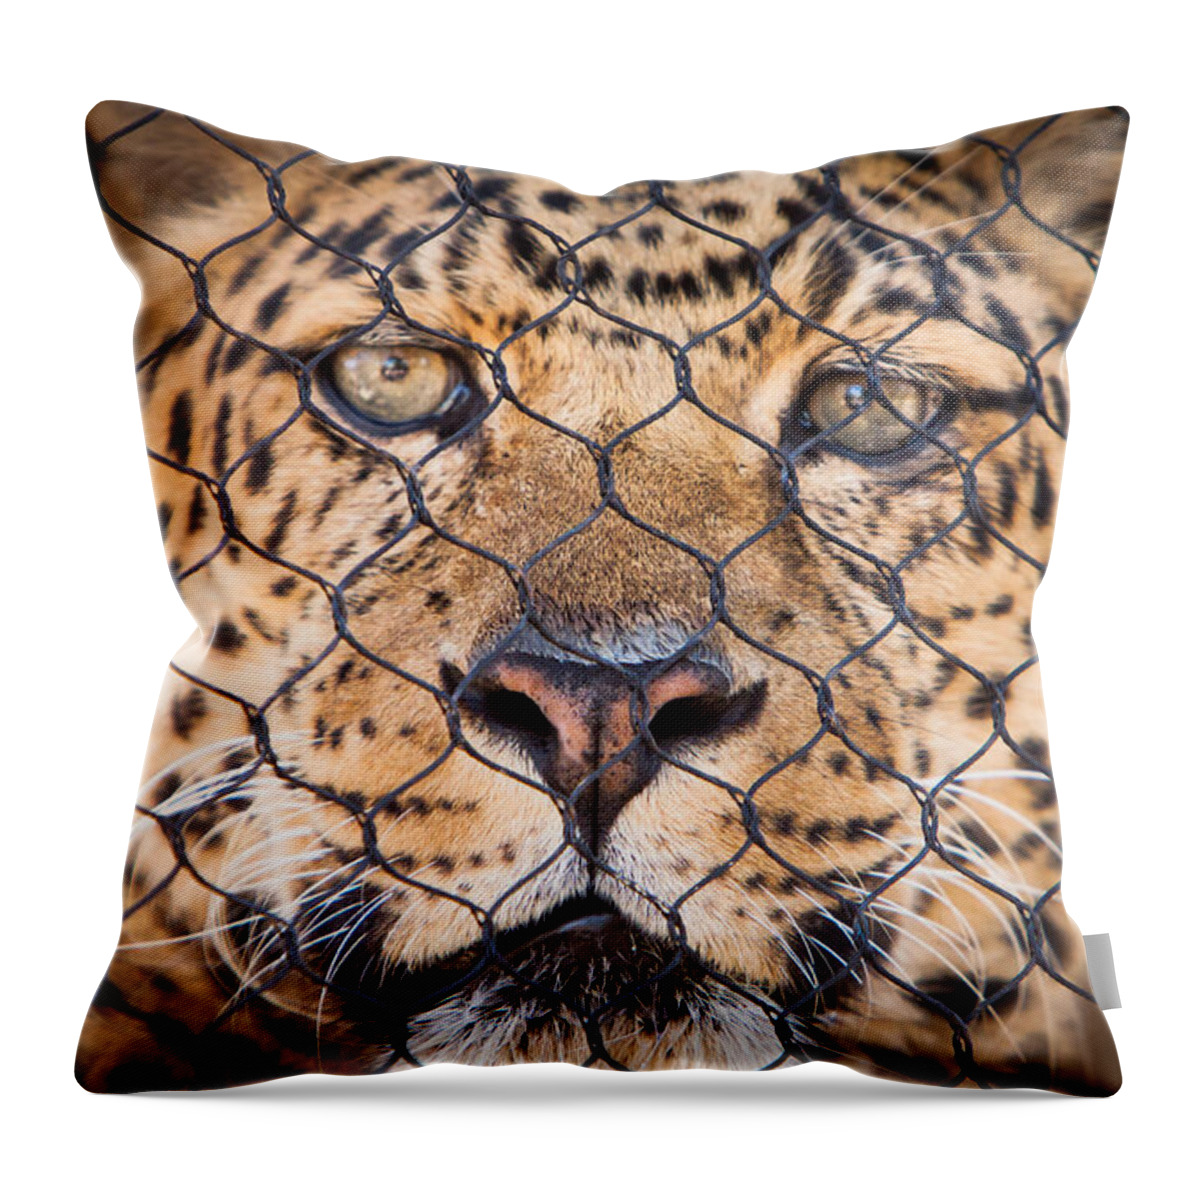 Black Throw Pillow featuring the photograph Let Me Out by John Wadleigh